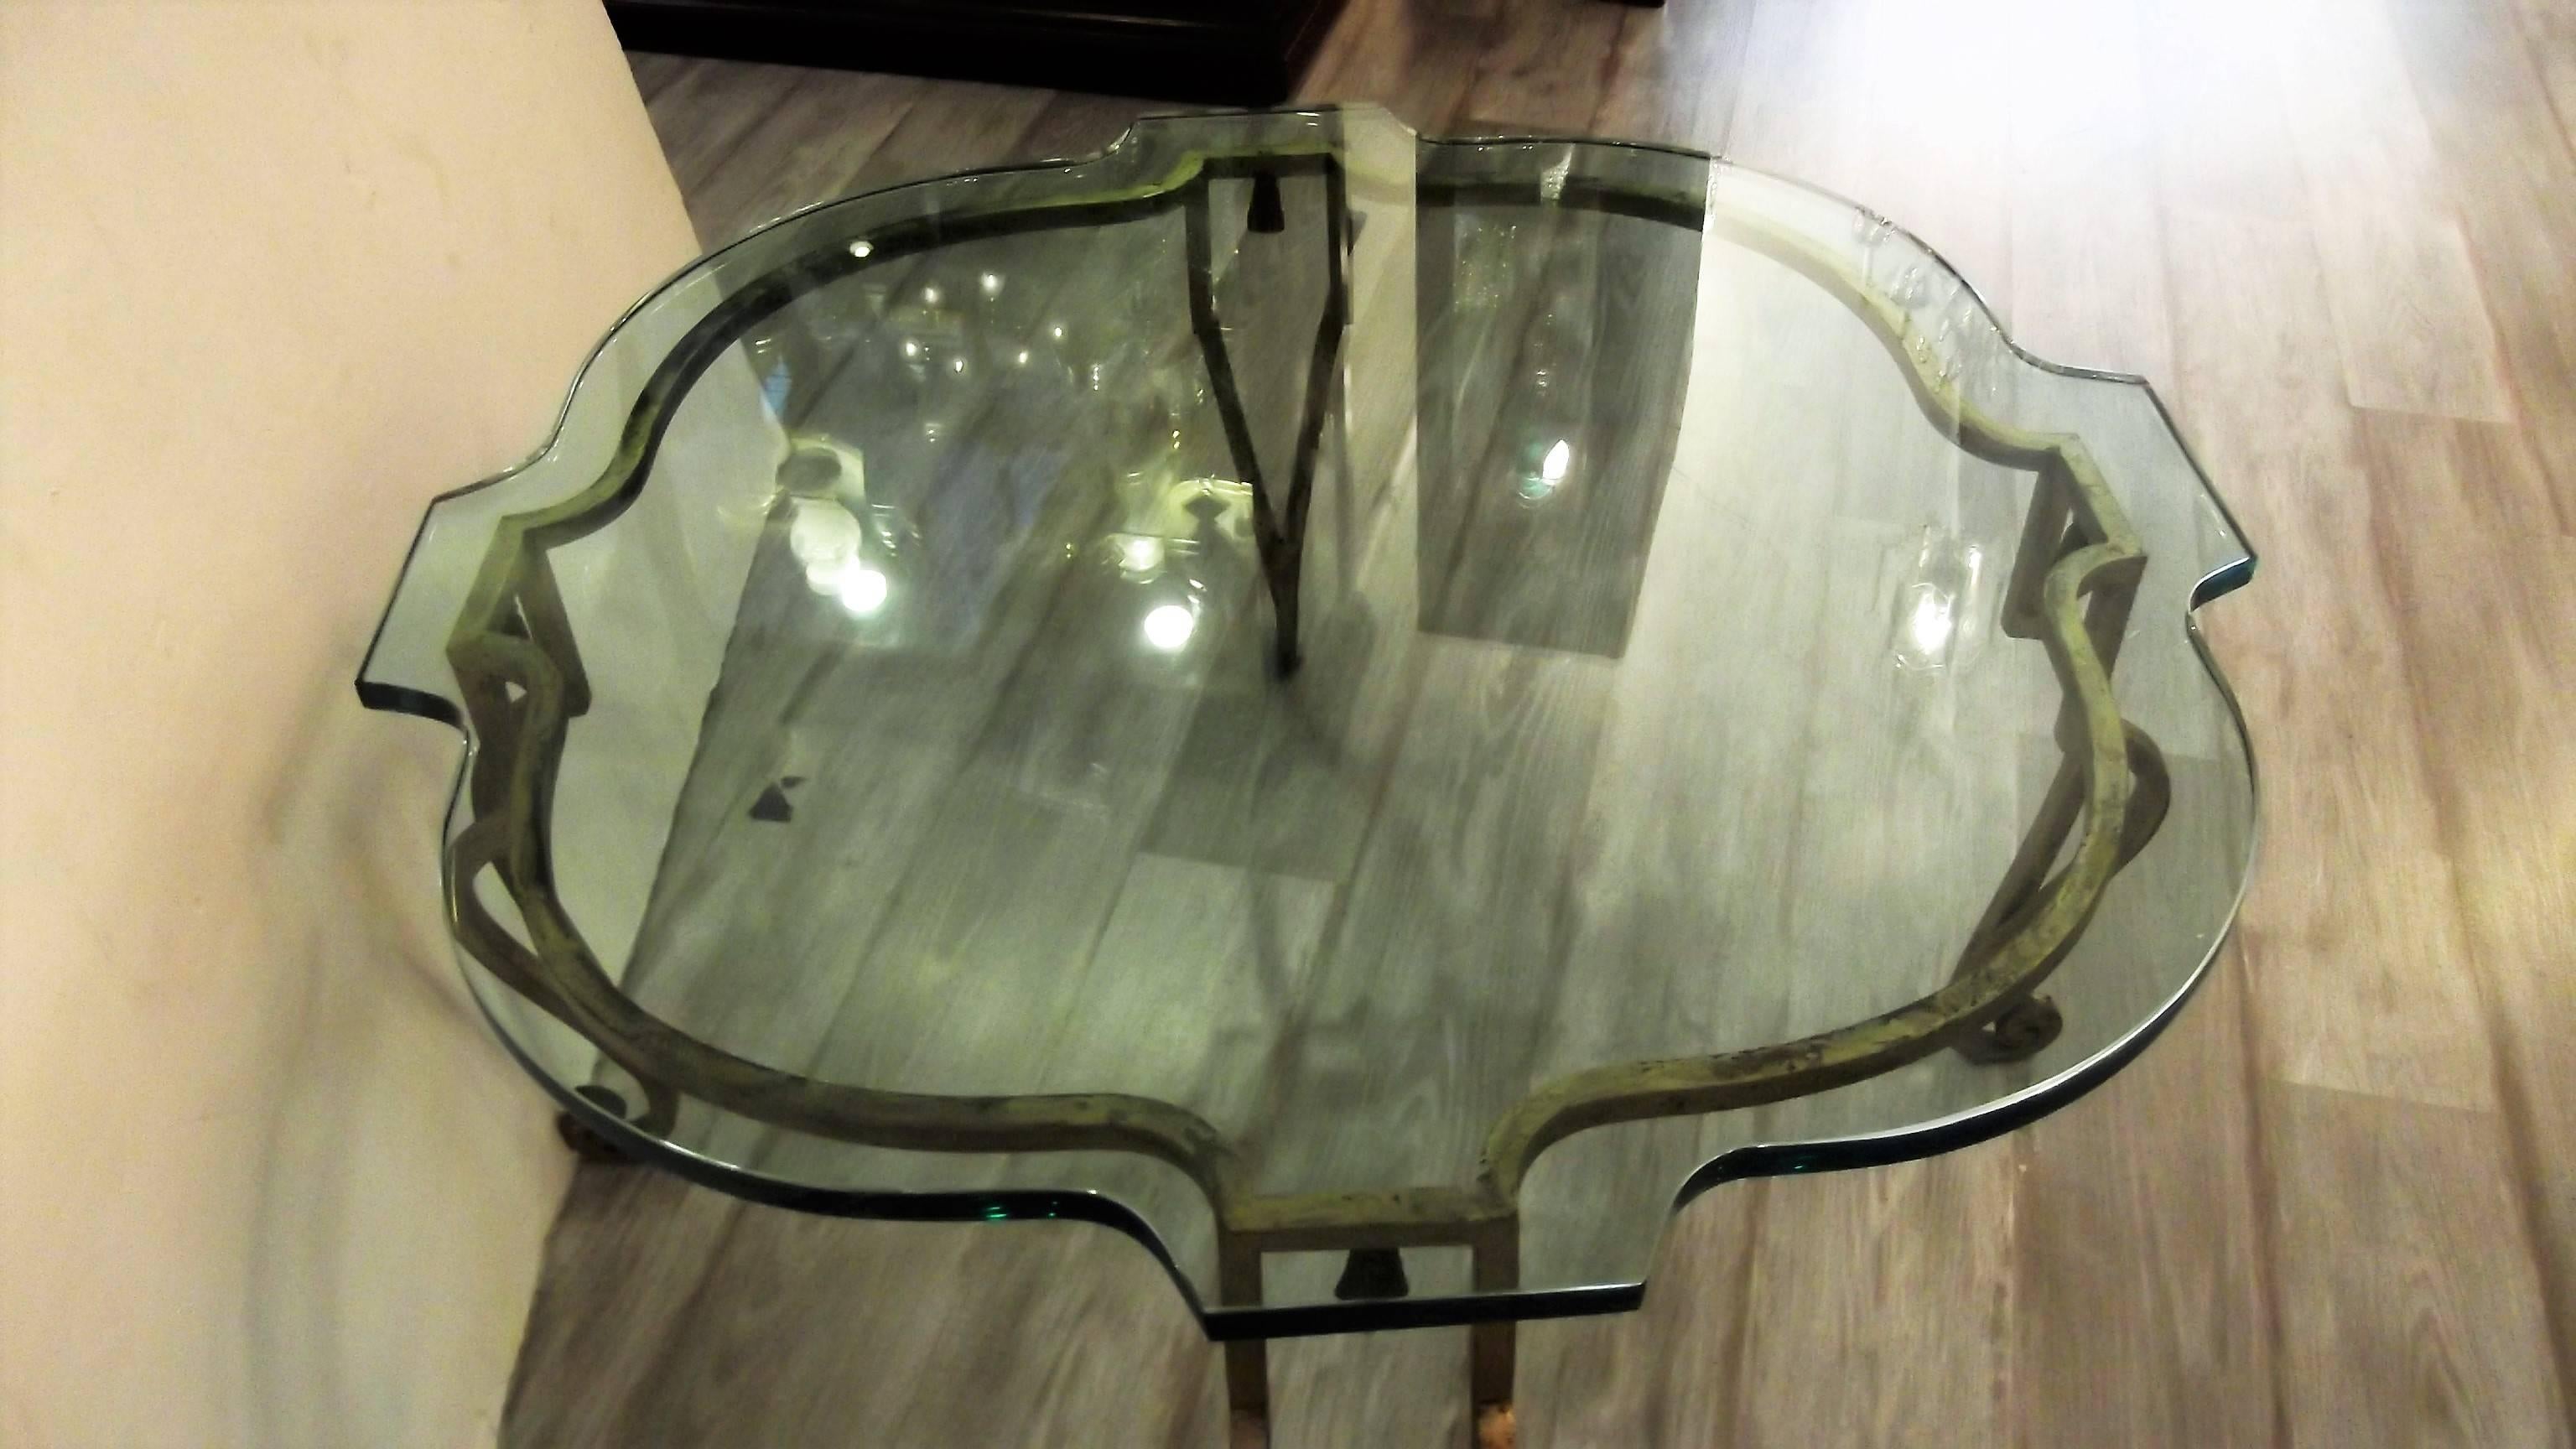 Elegant French glass and distressed gilt iron cocktail table attributed to Maison Ramsey. The custom scalloped top resting on a hand forged shapely iron base with a worn gilt finished surface. Nice medium size with open and airy feel.
There are